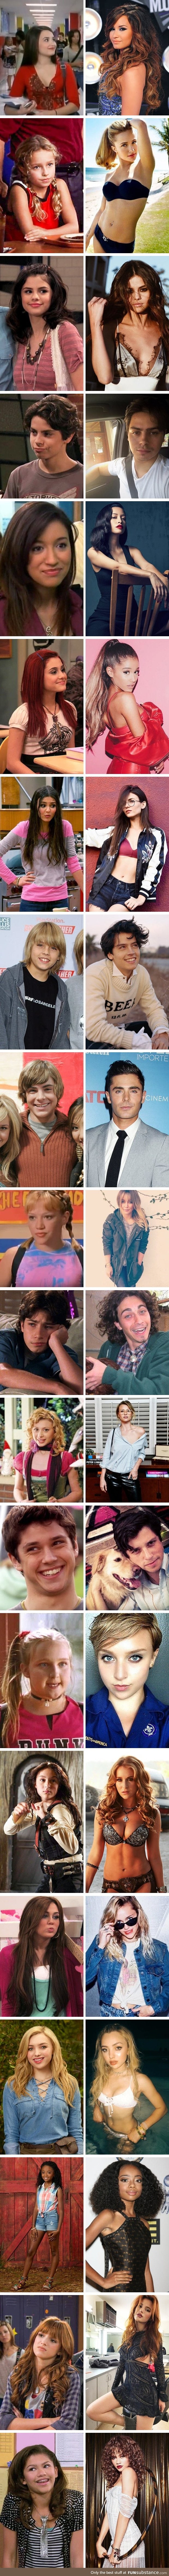 20 Disney and Nickelodeon Stars Who Grew Up Too Fast